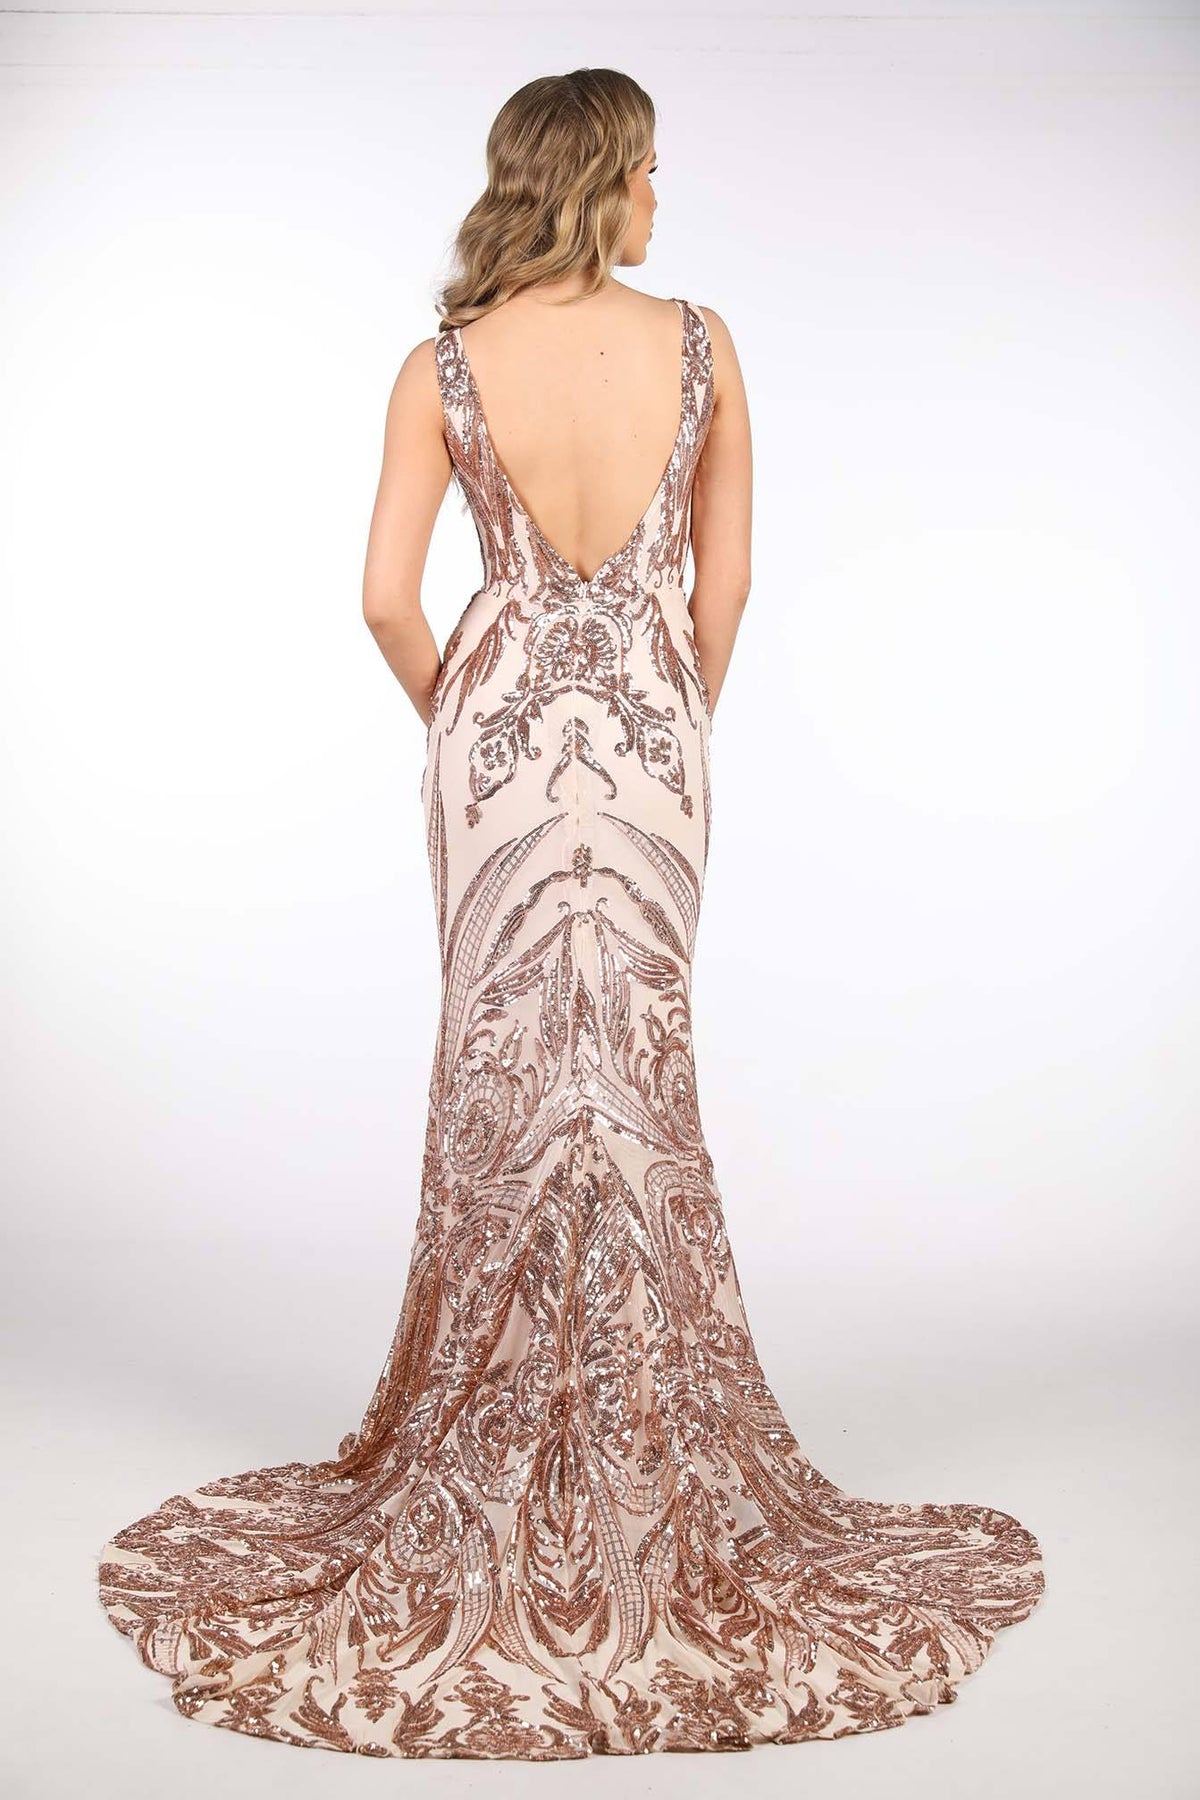 Open Back Design of Rose Gold Pattern Sequin Gown with V Neckline, Mermaid Silhouette and Sweep Train